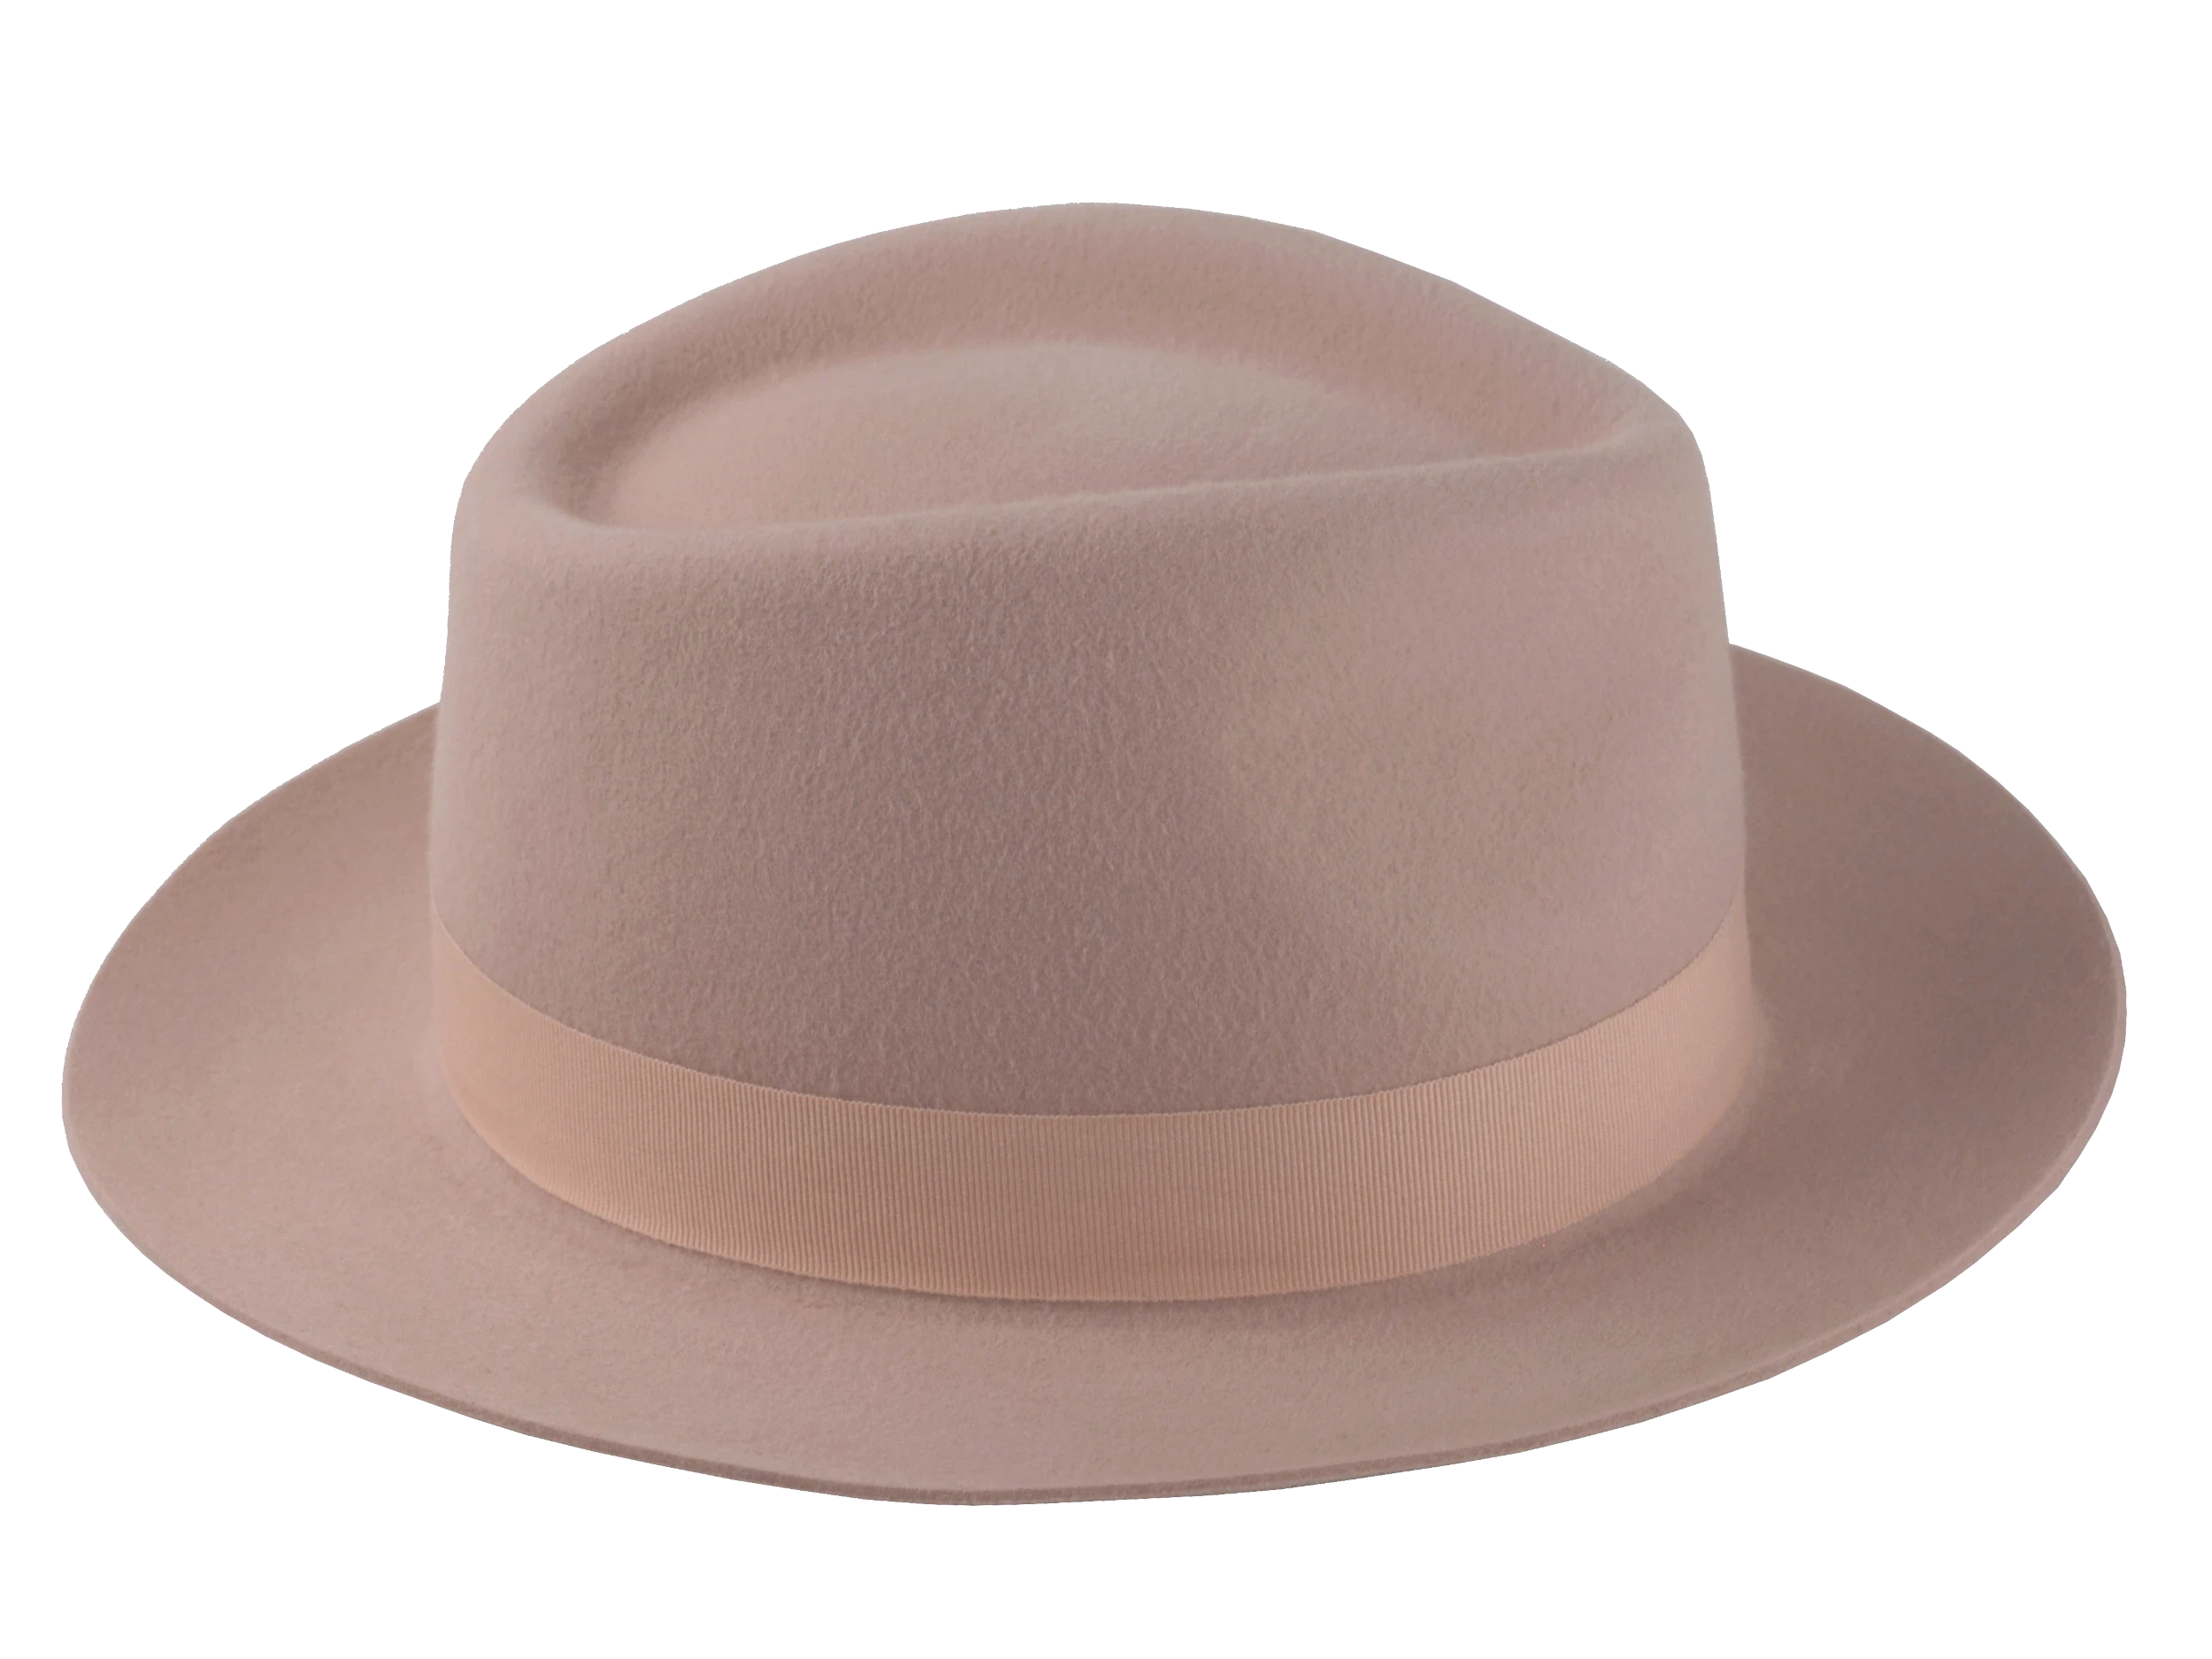 The Clubber: Up-turned brim giving the fedora a distinctive look | Agnoulita Hats